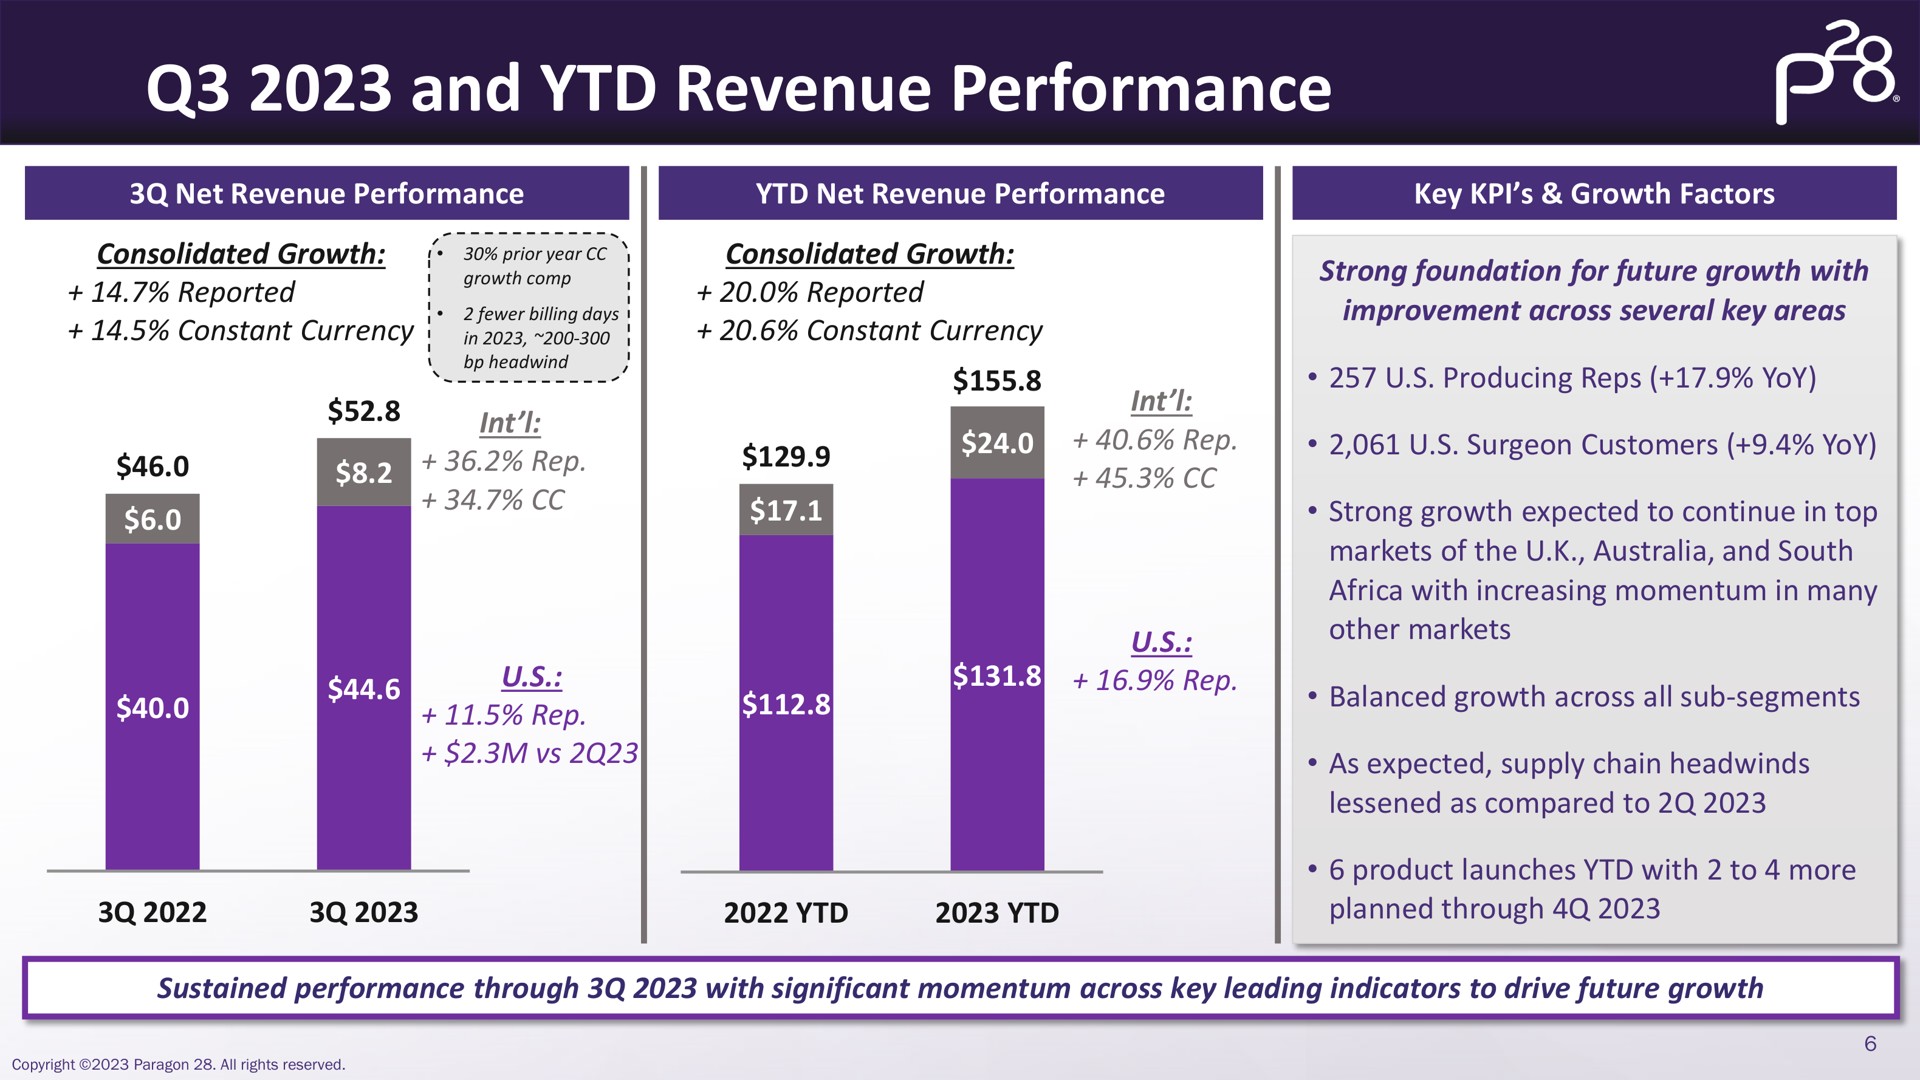 and revenue performance rep ase producing reps yoy planned through | Paragon28